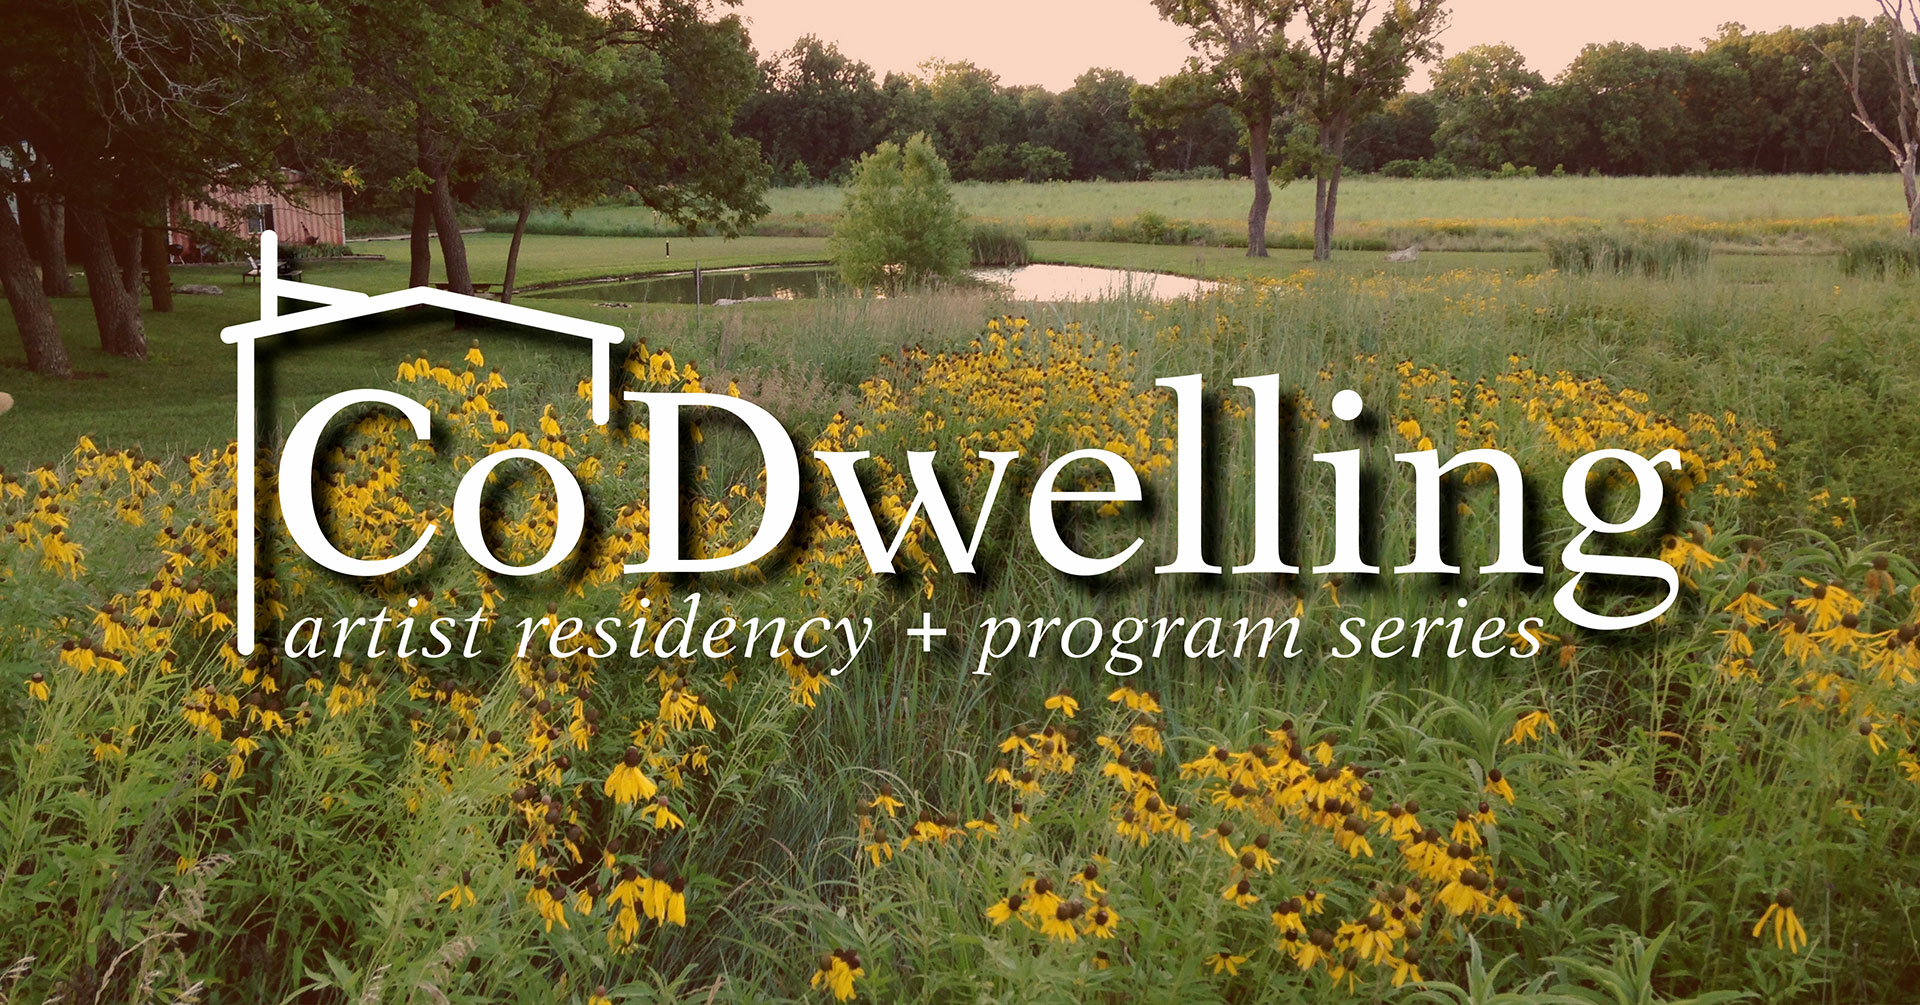 CoDwelling: Artist Residency and Program Series